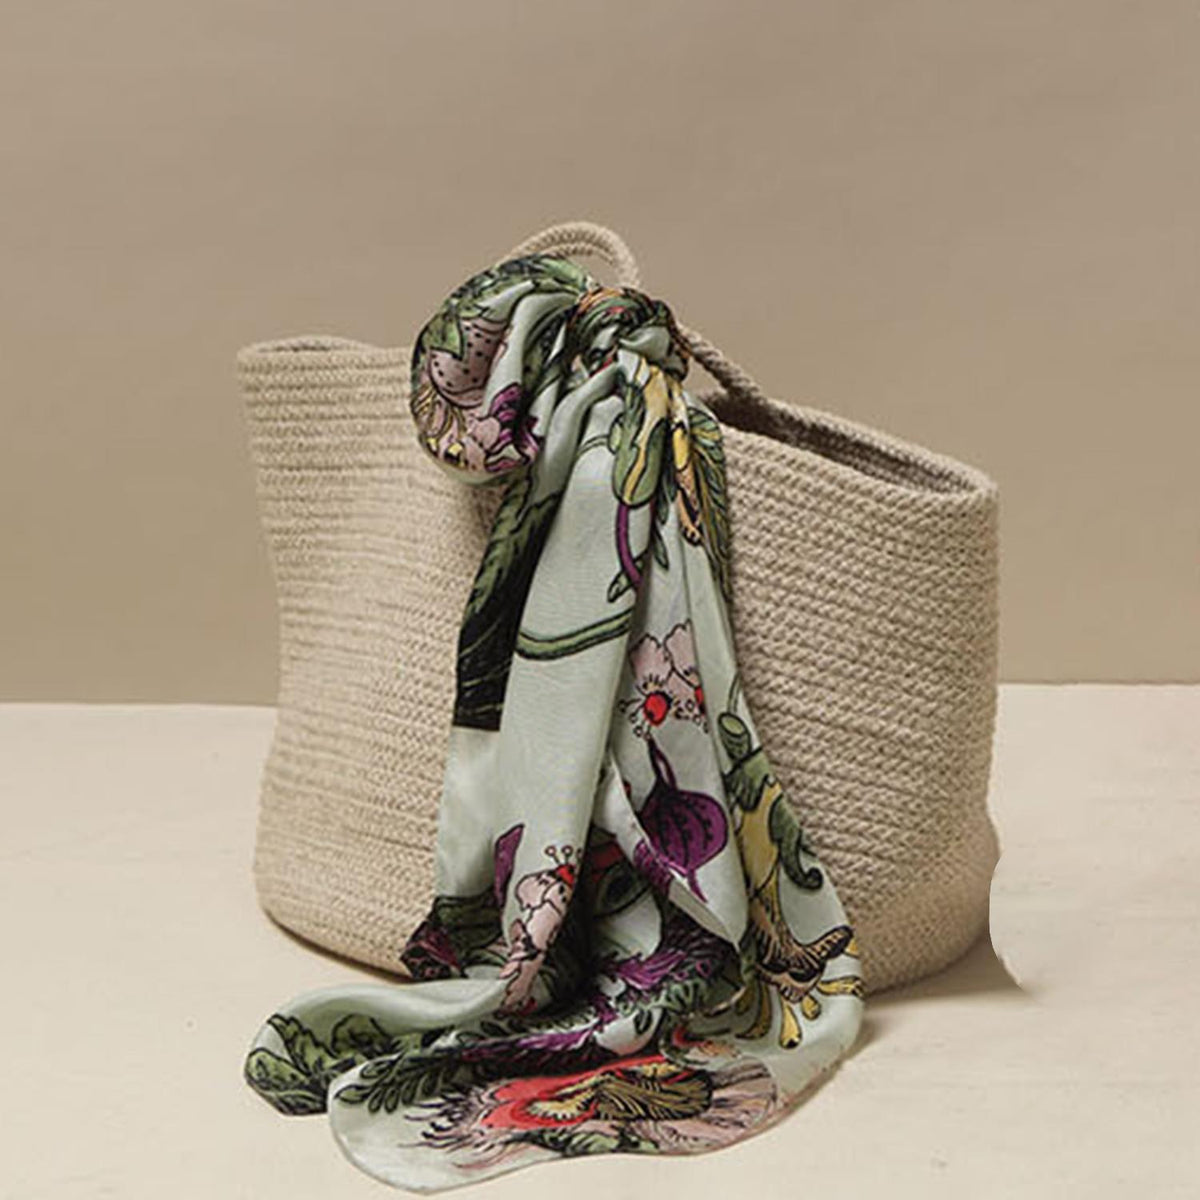 One Hundred Stars Eccentric Bloom Scarf in Sage Green